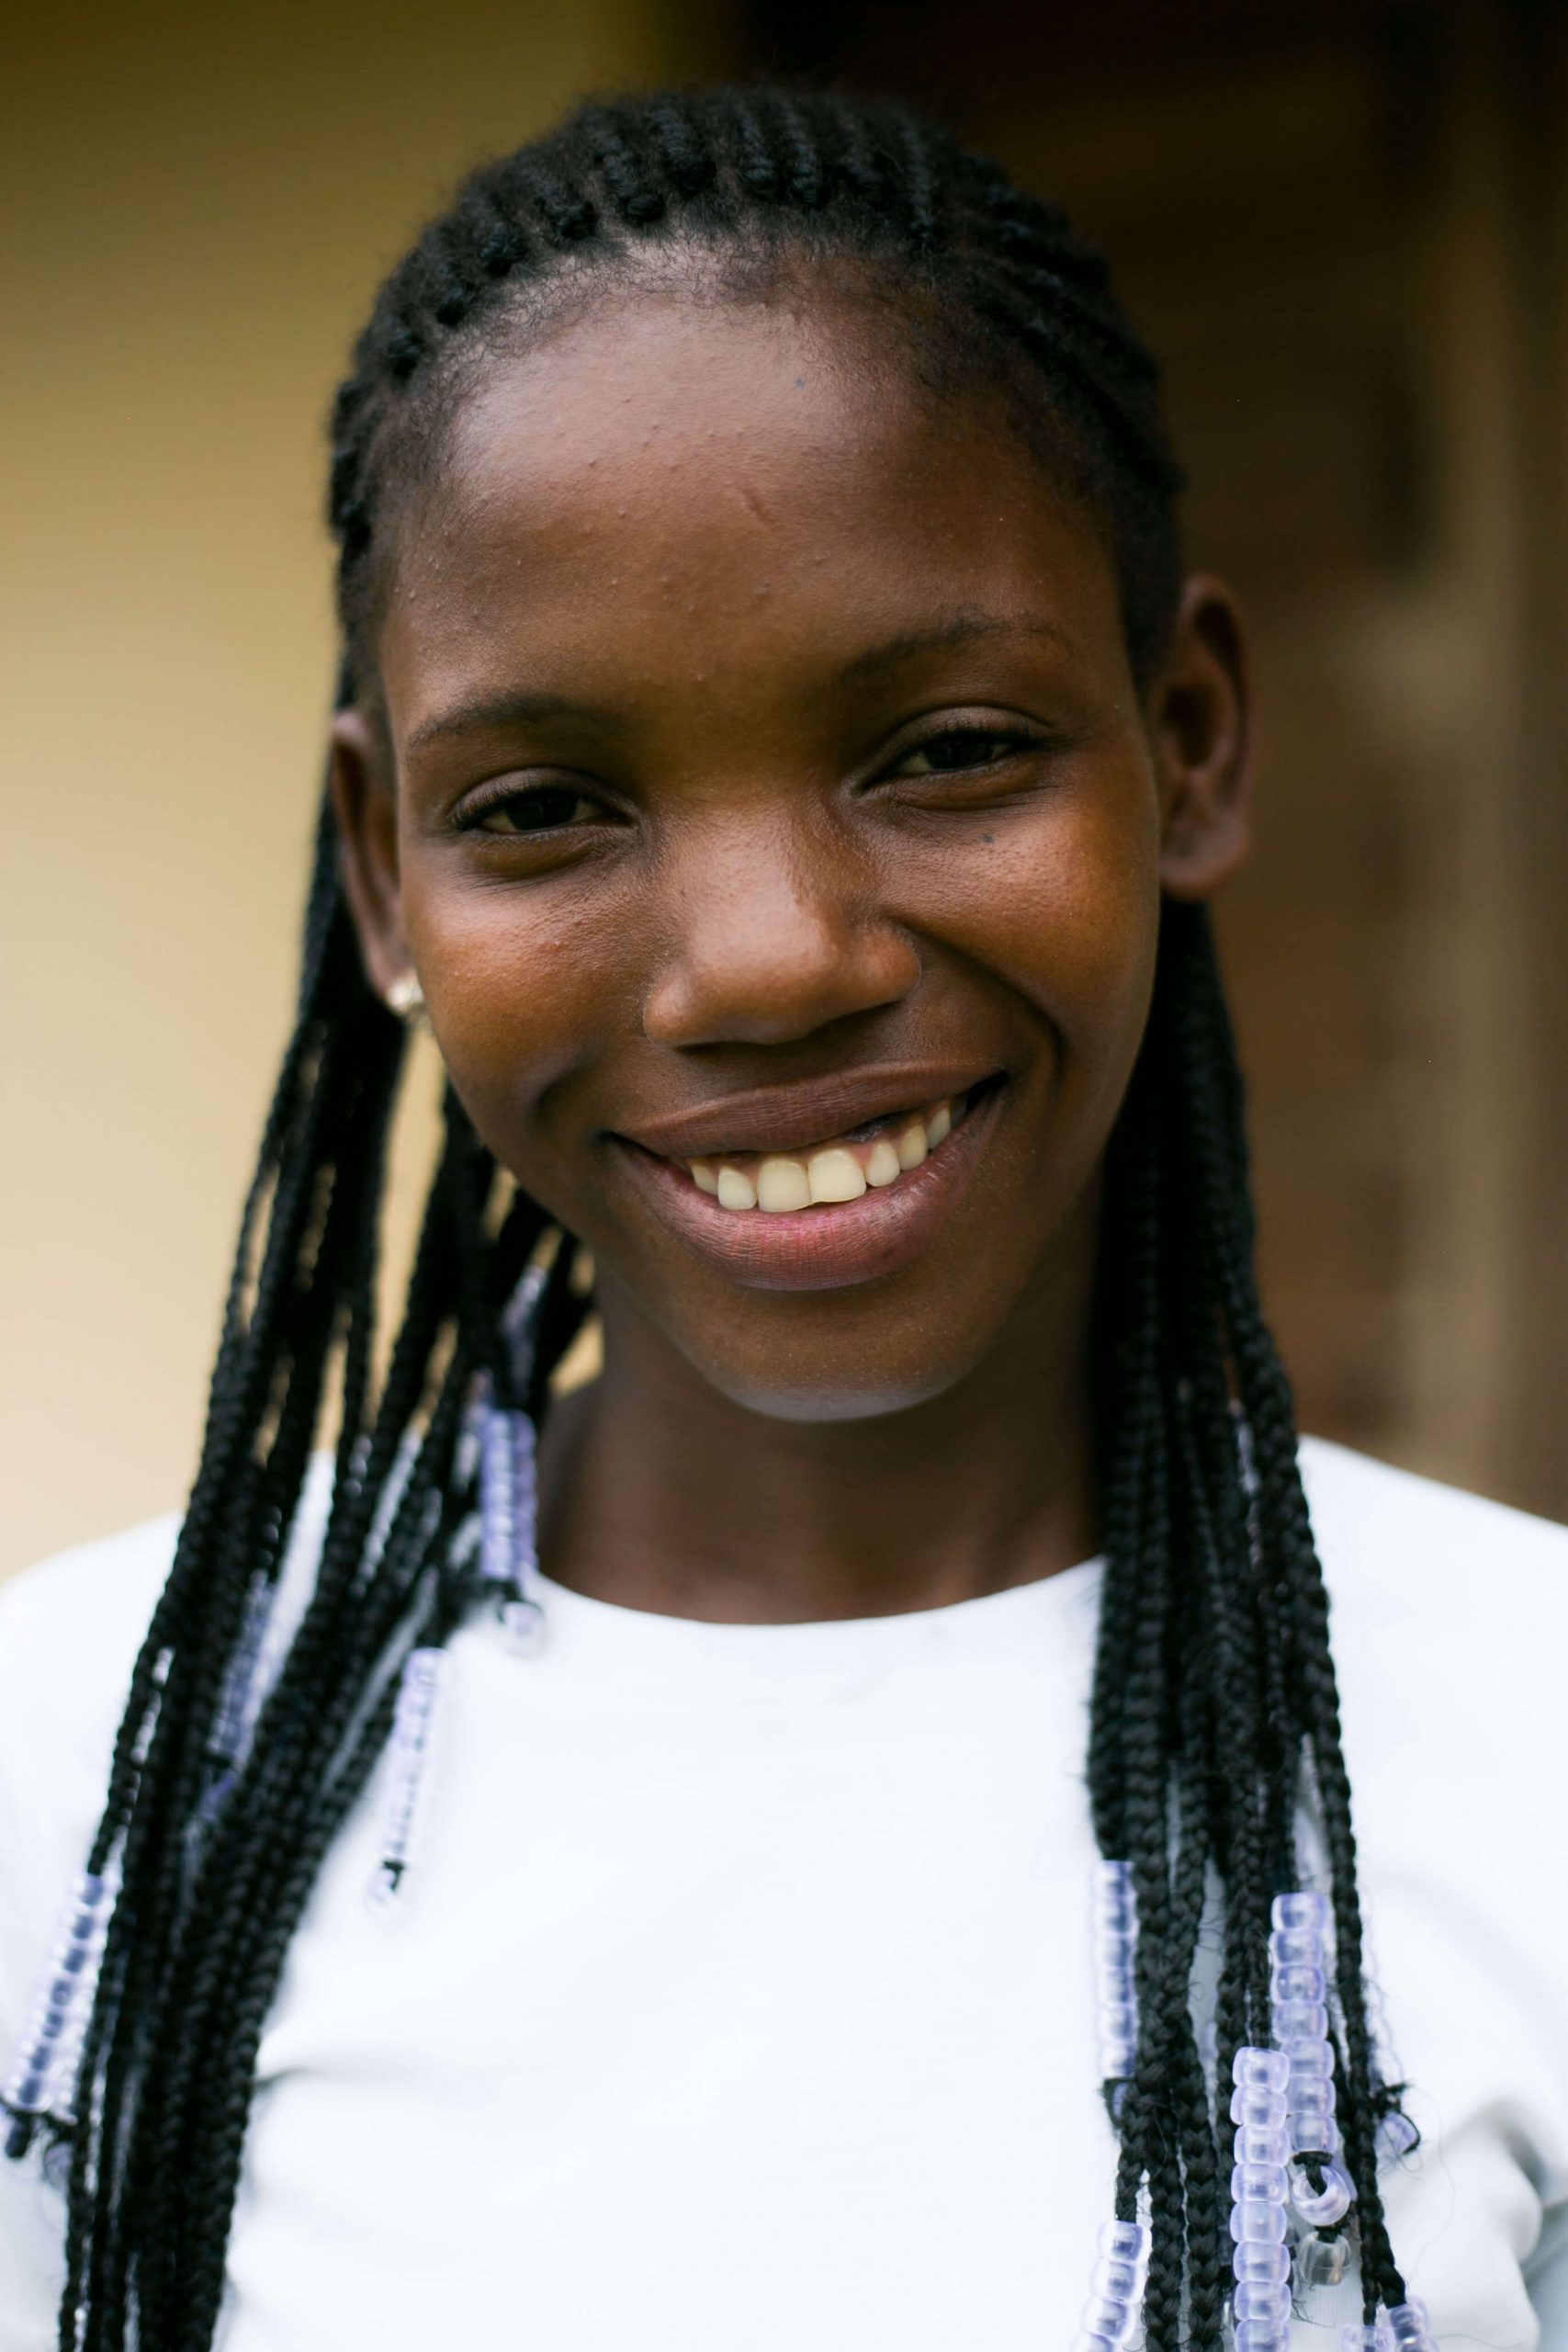 Portrait of a Black girl wearing a white shirt, smiling while looking directly at the camera.